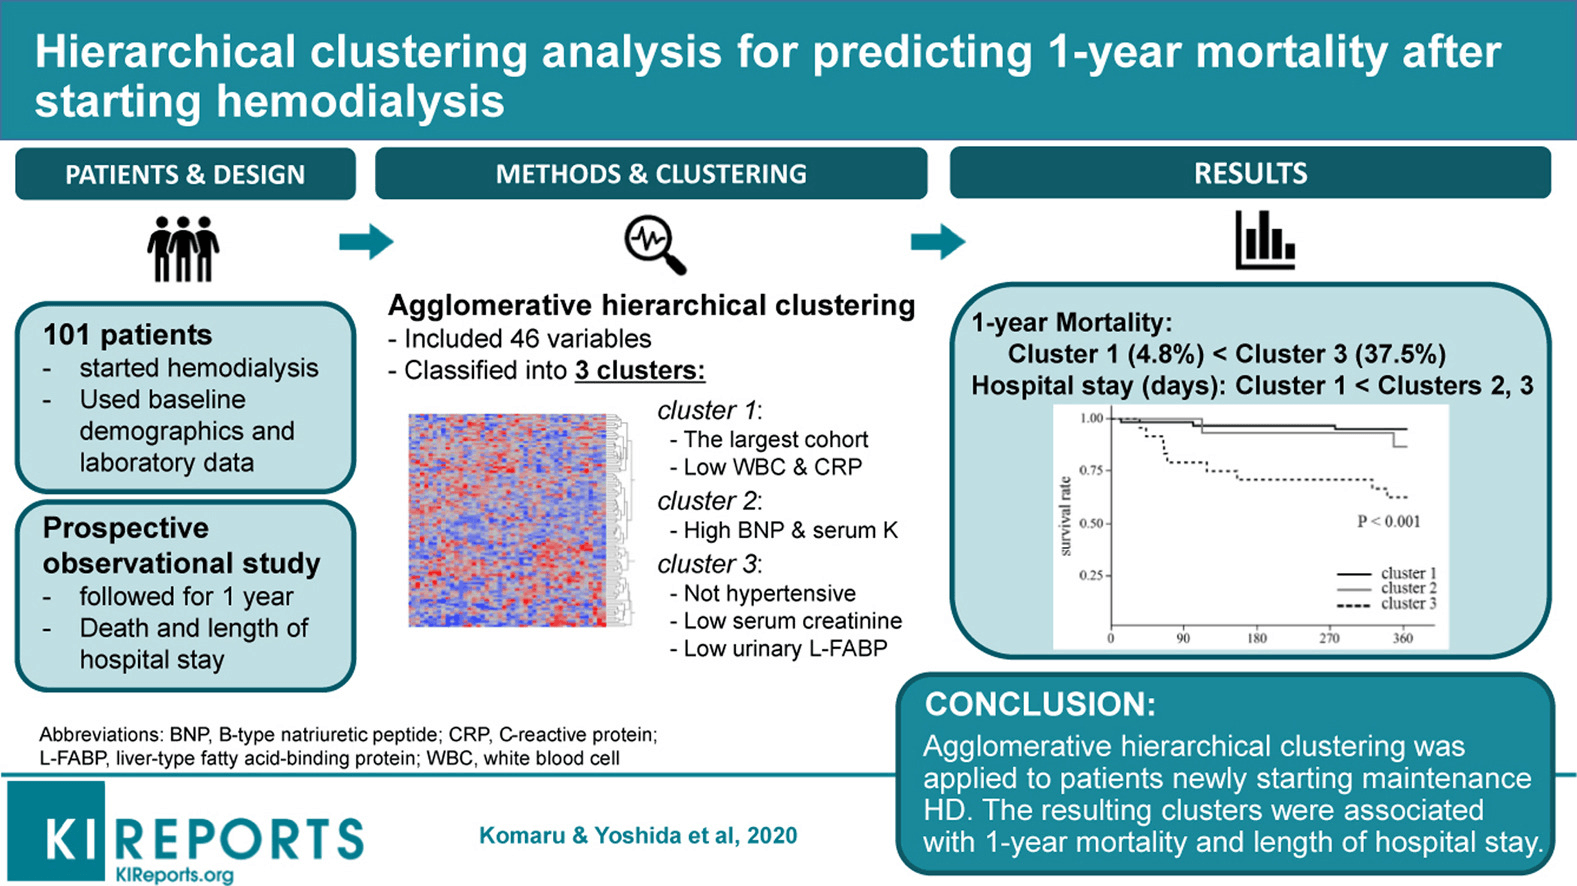 Clinical clustering